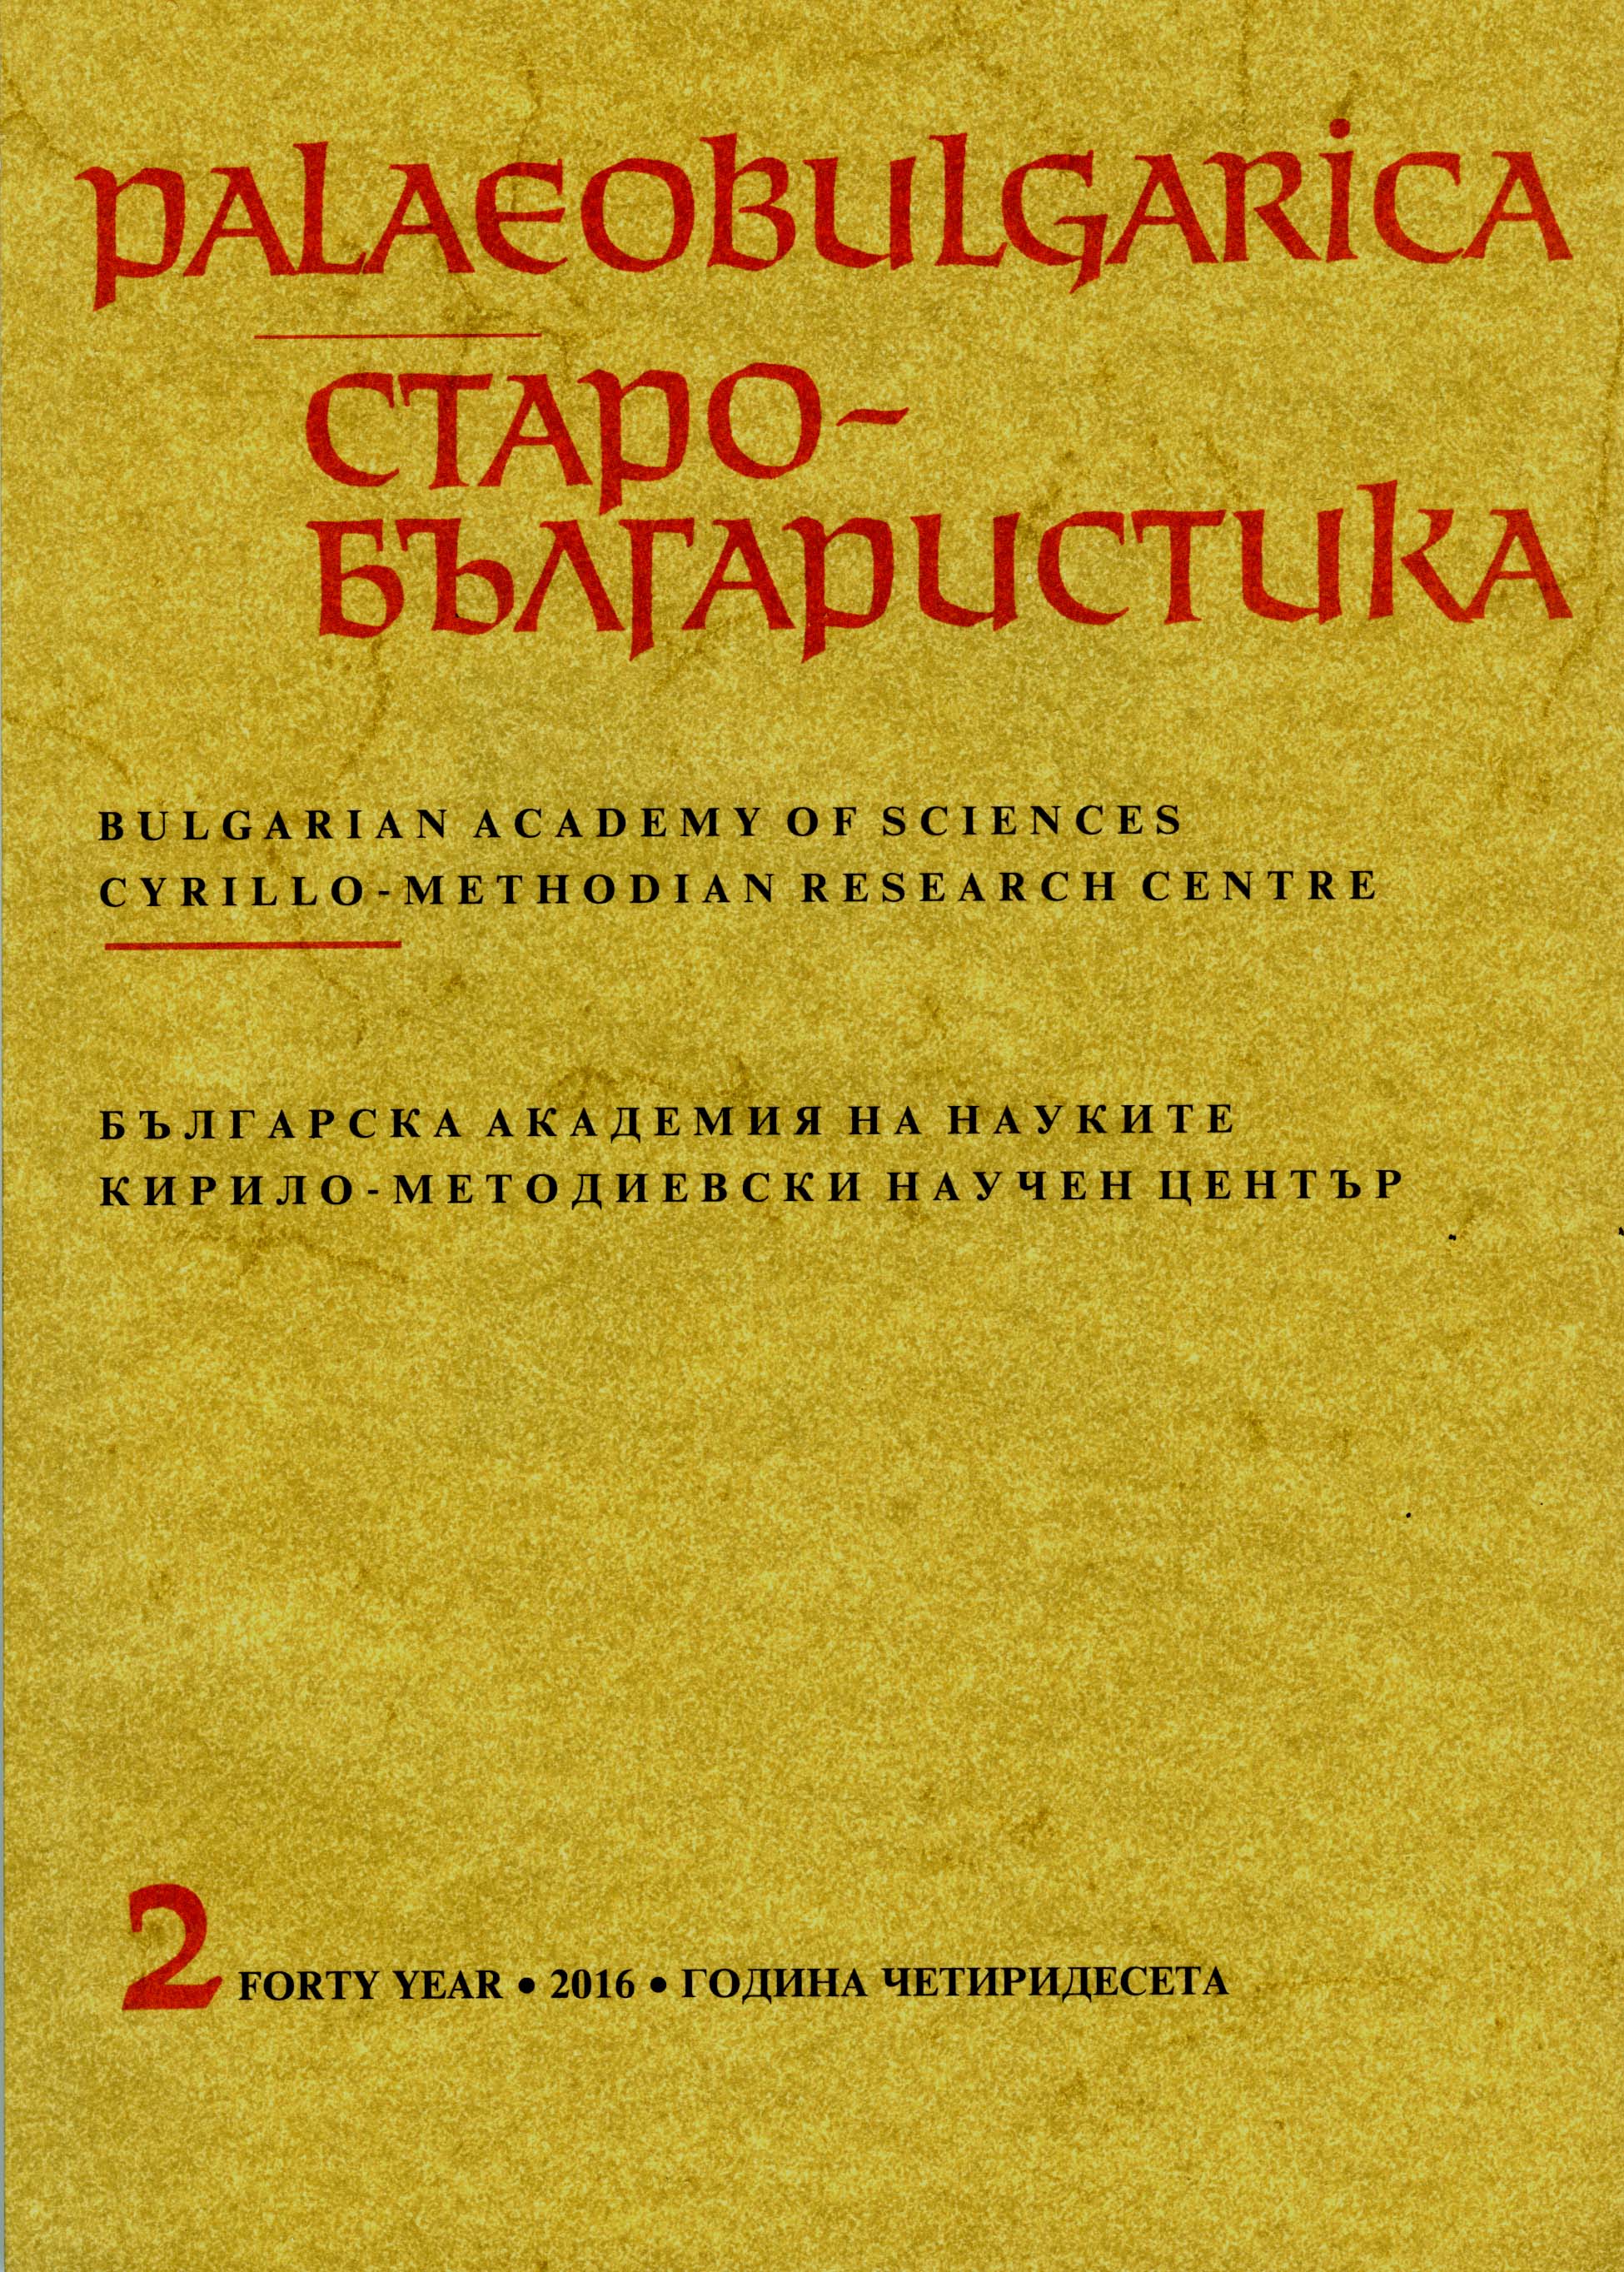 On the Question of the Early Stages of the History of the Slavonic Triodion
(Based on the Text of the Stichera from the Great Canon by St. Andrew of Crete) Cover Image